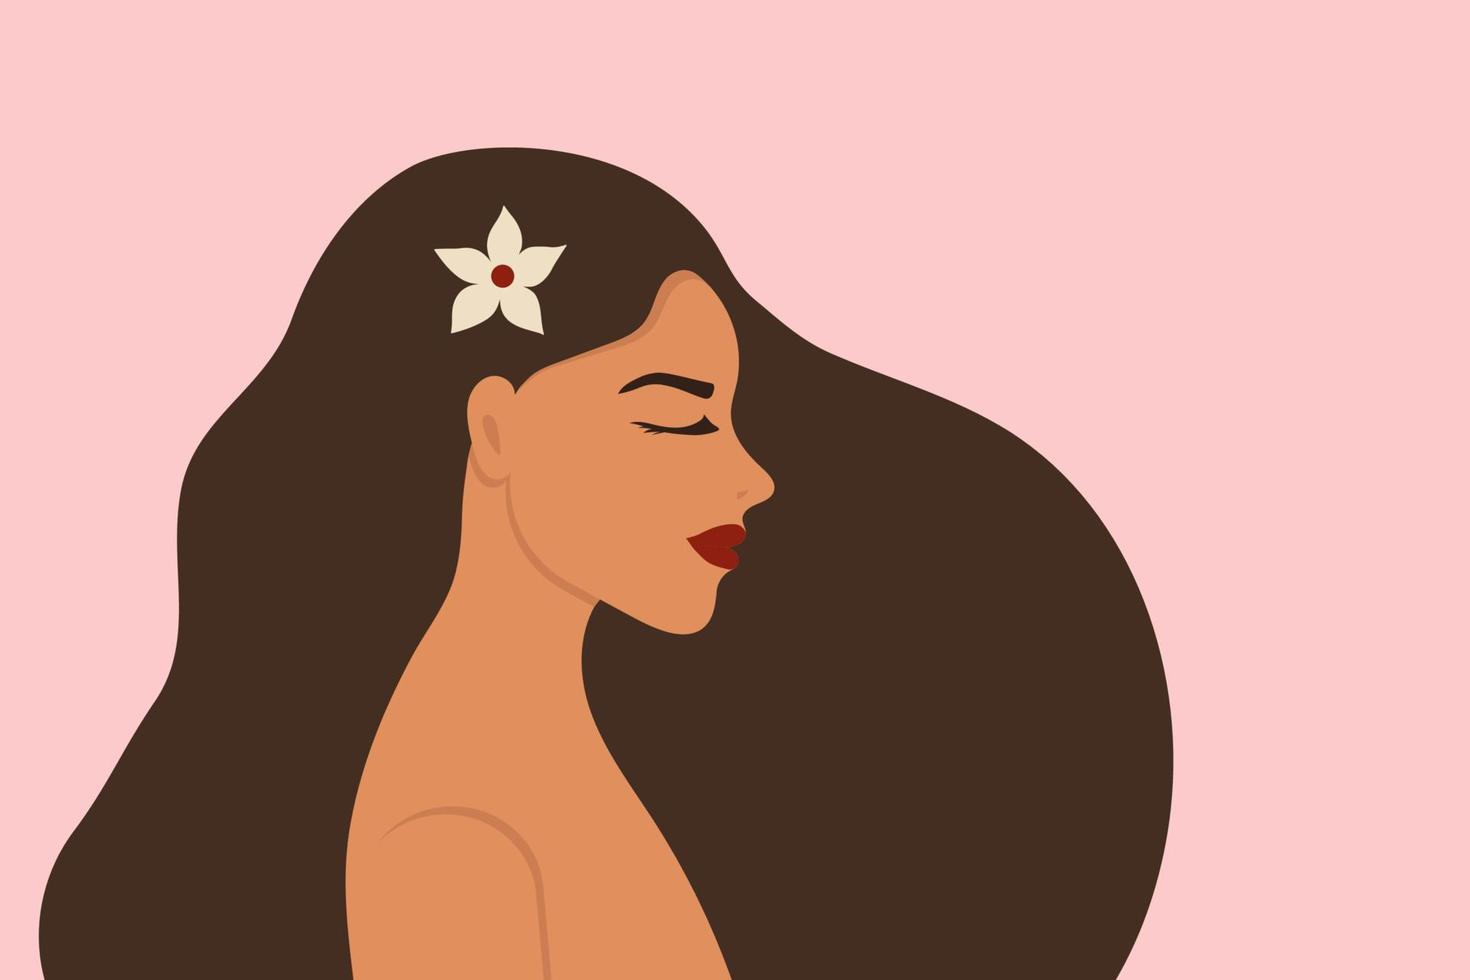 Beautiful women with long hair. Cards with minimalistic illustrations. vector illustration